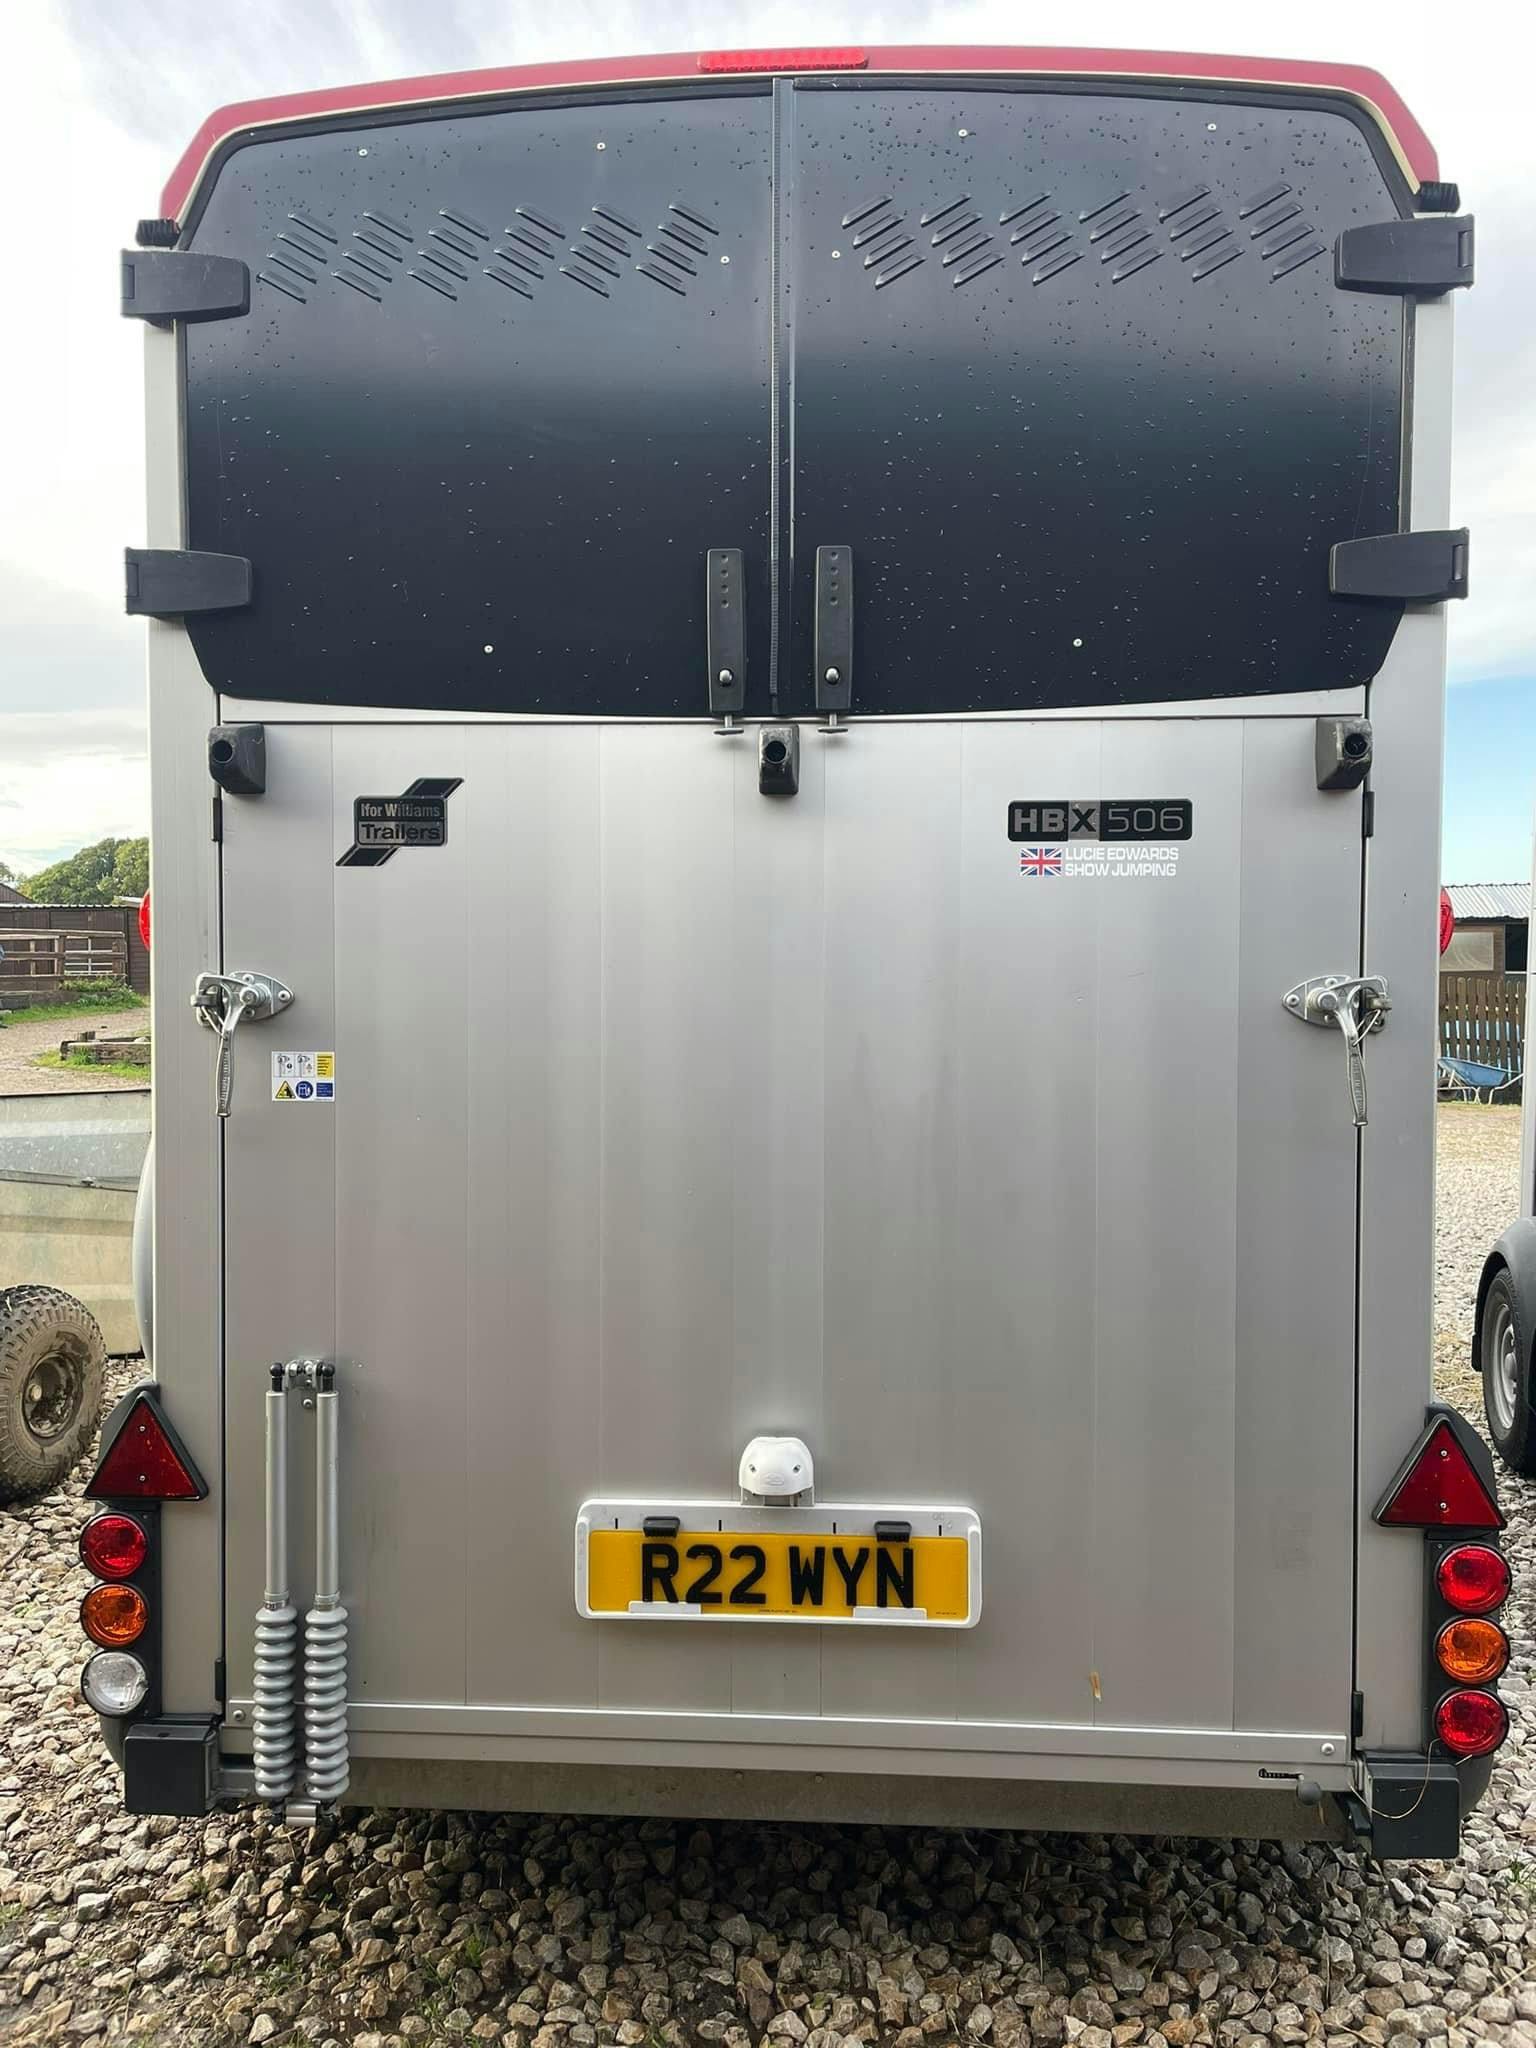 The rear doors of a horse box with a 4D 5mm number plate